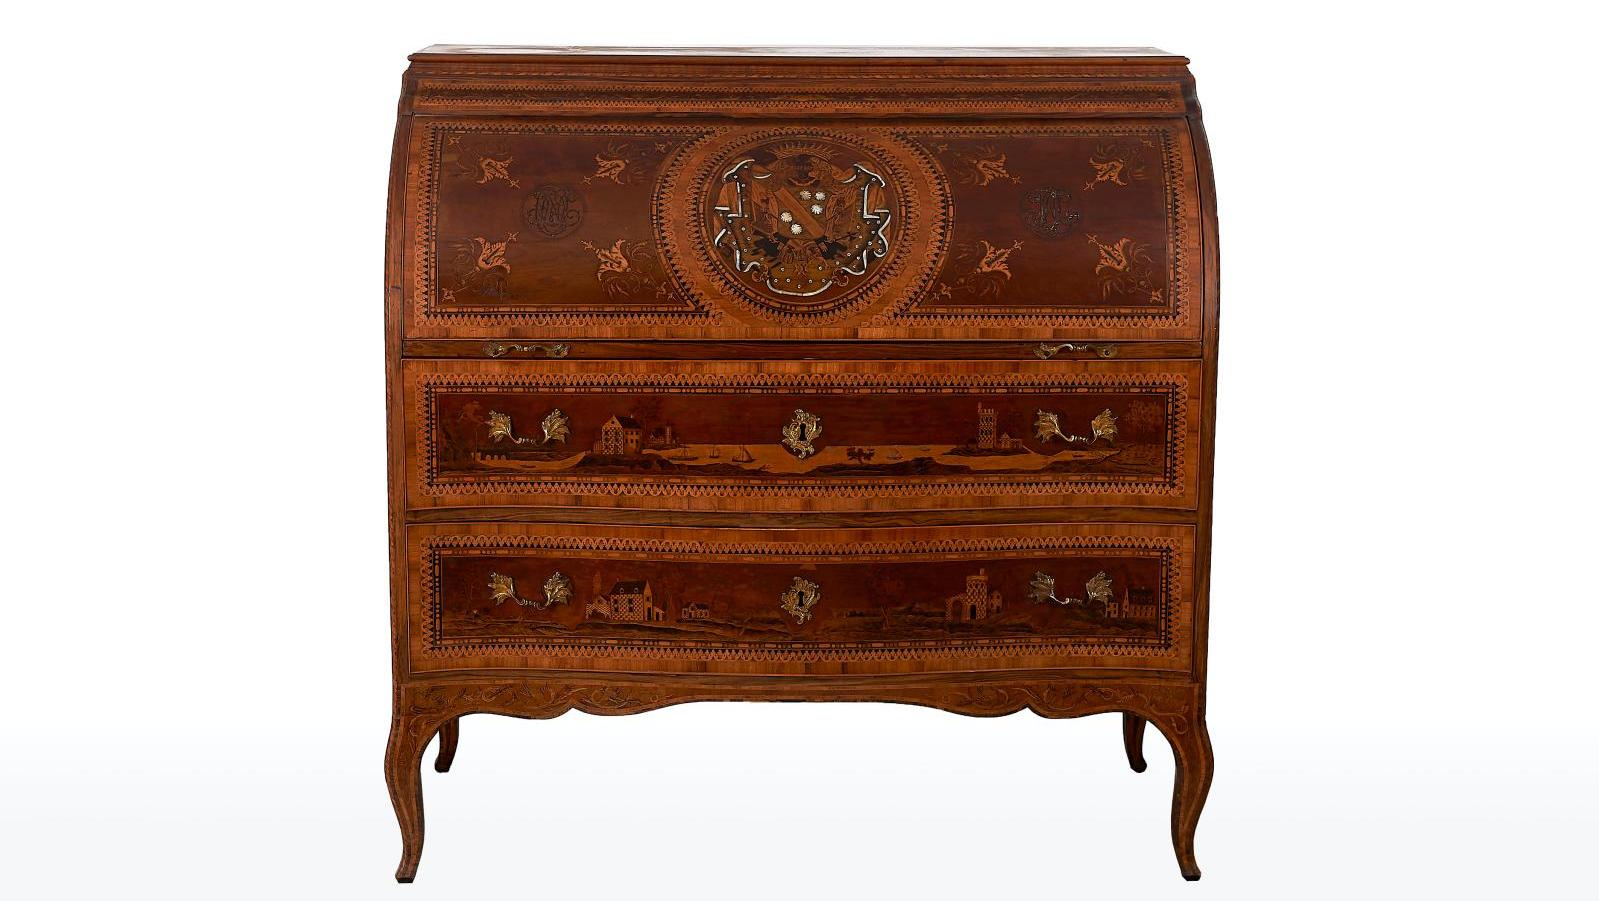 Spain, c. 1770, rolltop desk forming a commode with landscape marquetry, keyholes... The 18th-century Desk of Count of Asalto, Francisco González de Bassecourt